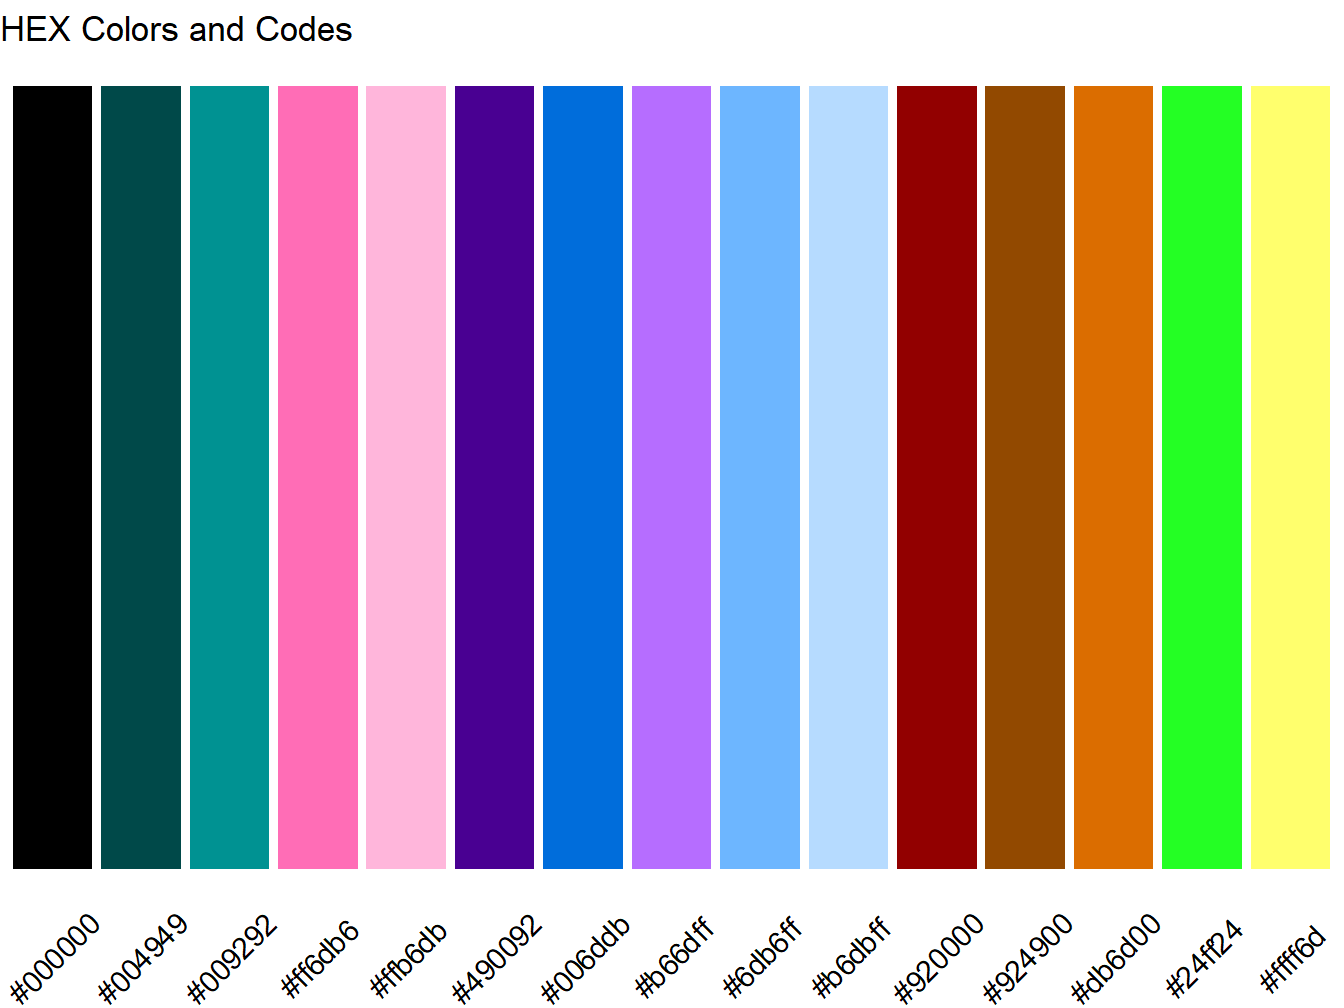 Colorblind Palette and Web Color Codes